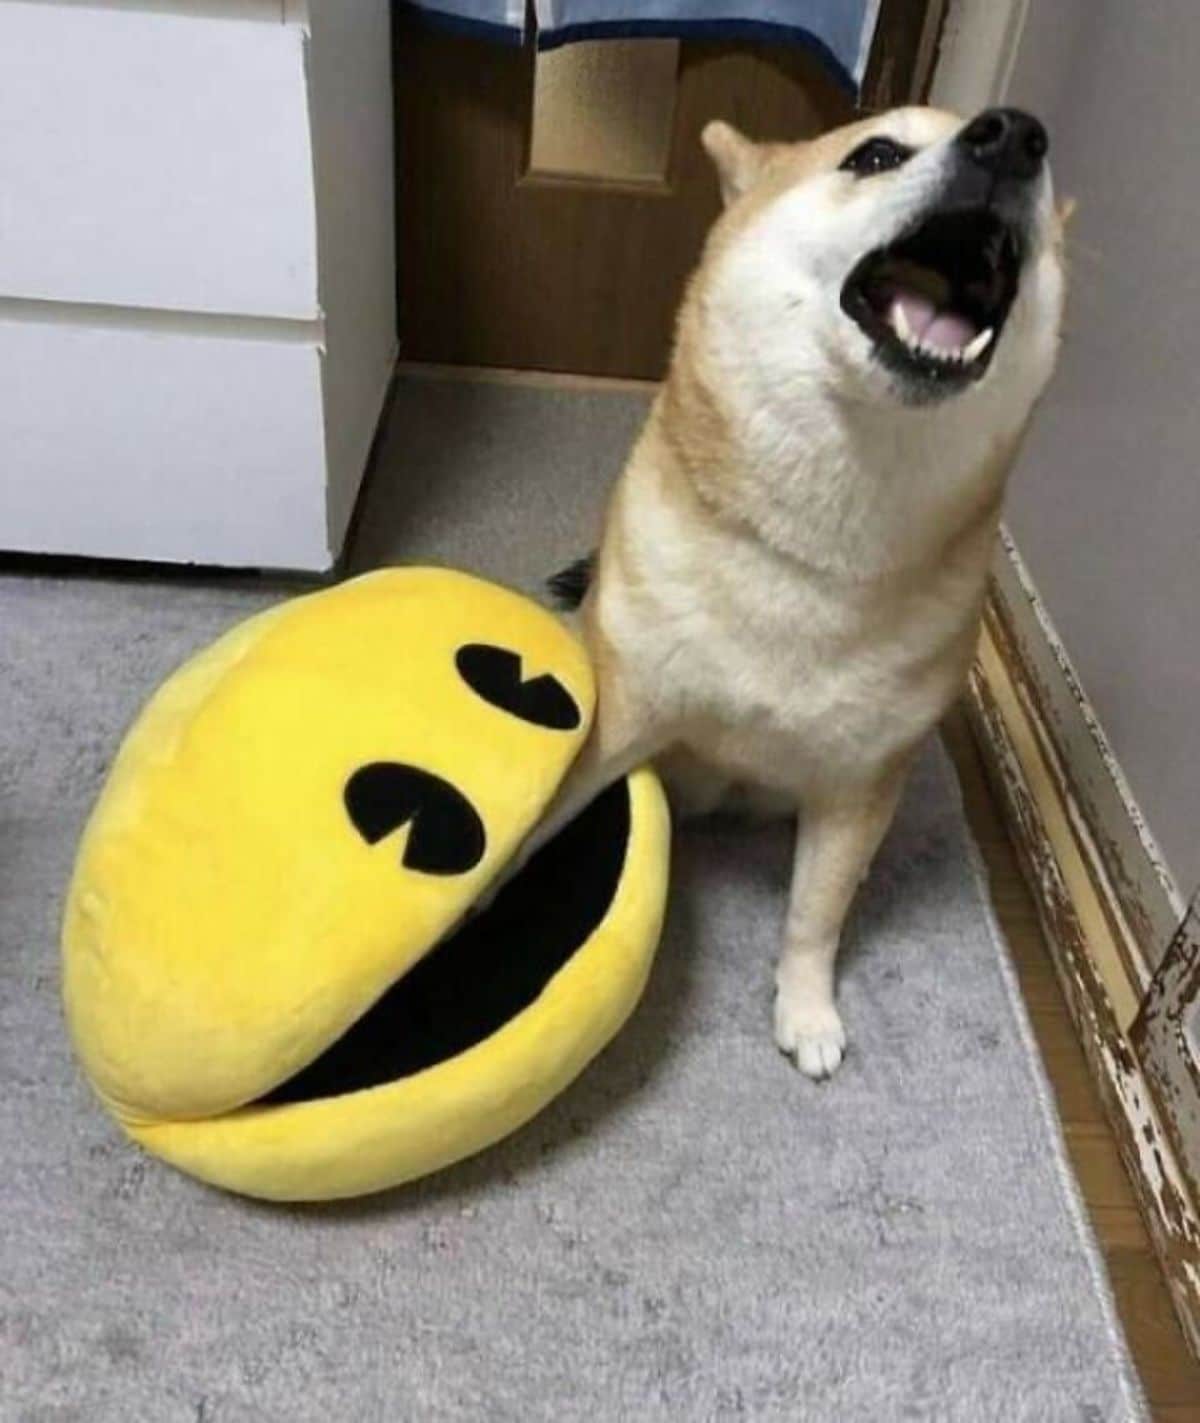 brown shiba inu with one leg inside a yellow stuffed toy's mouth and the dog is screaming